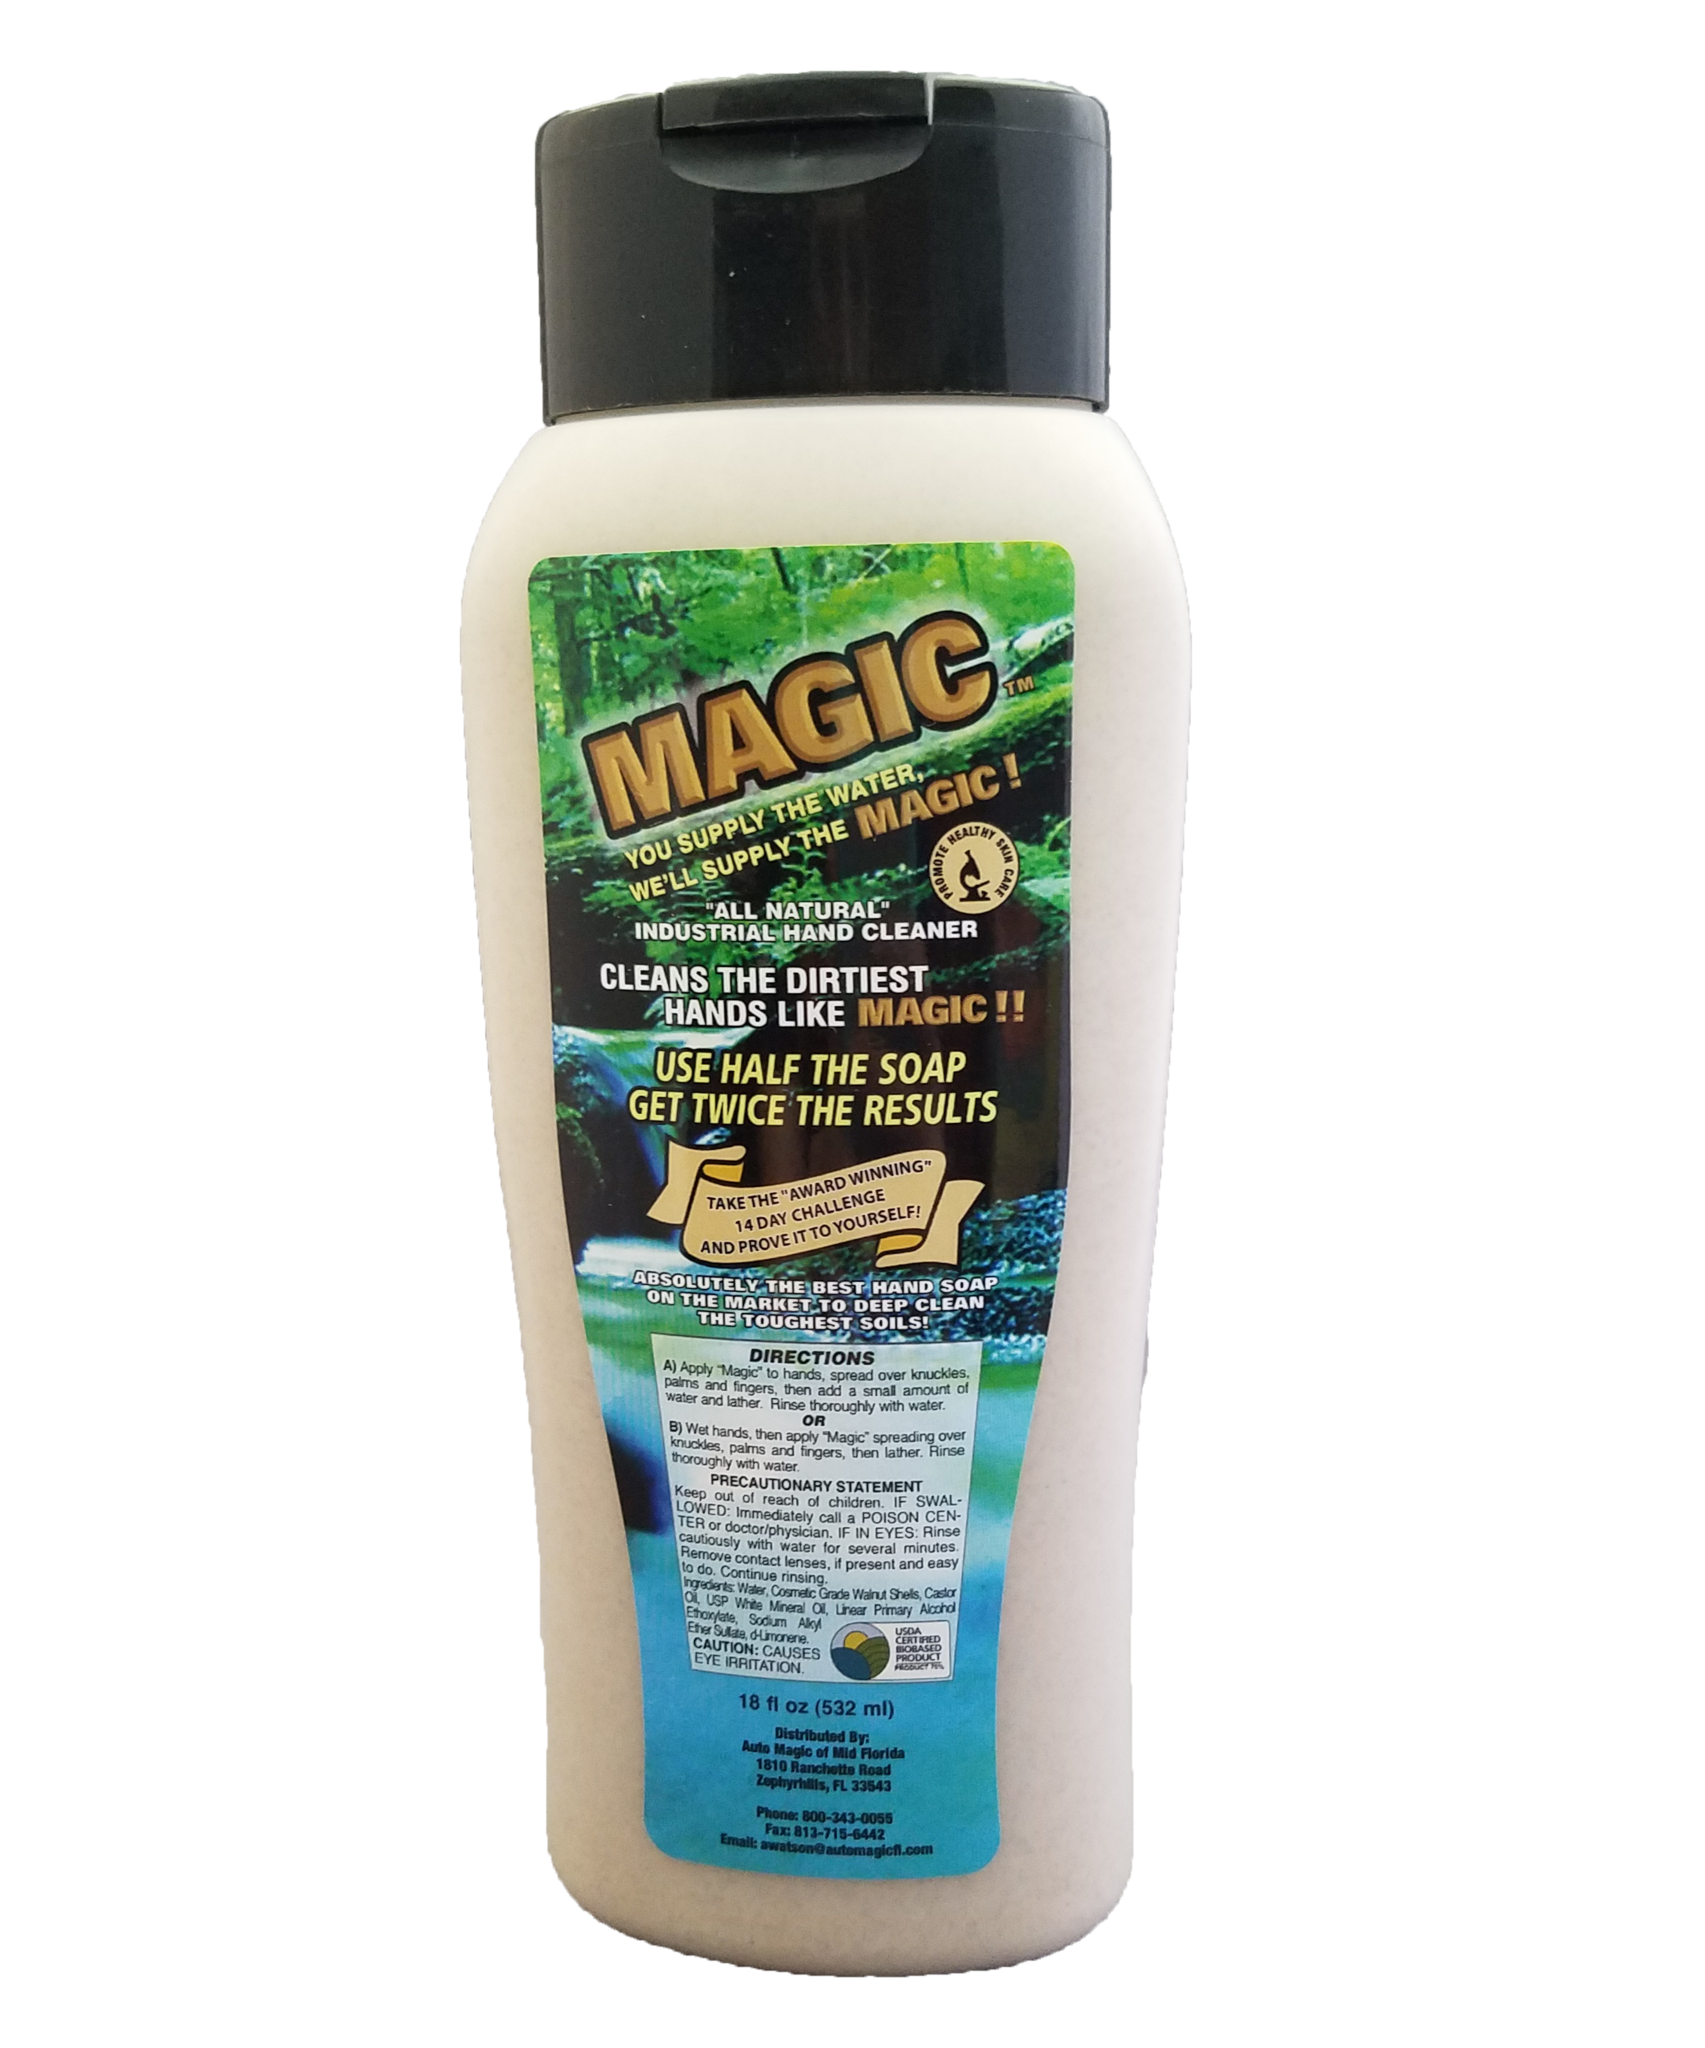 Magic Hand Soap with walnut shells and emollient infused 18 oz.